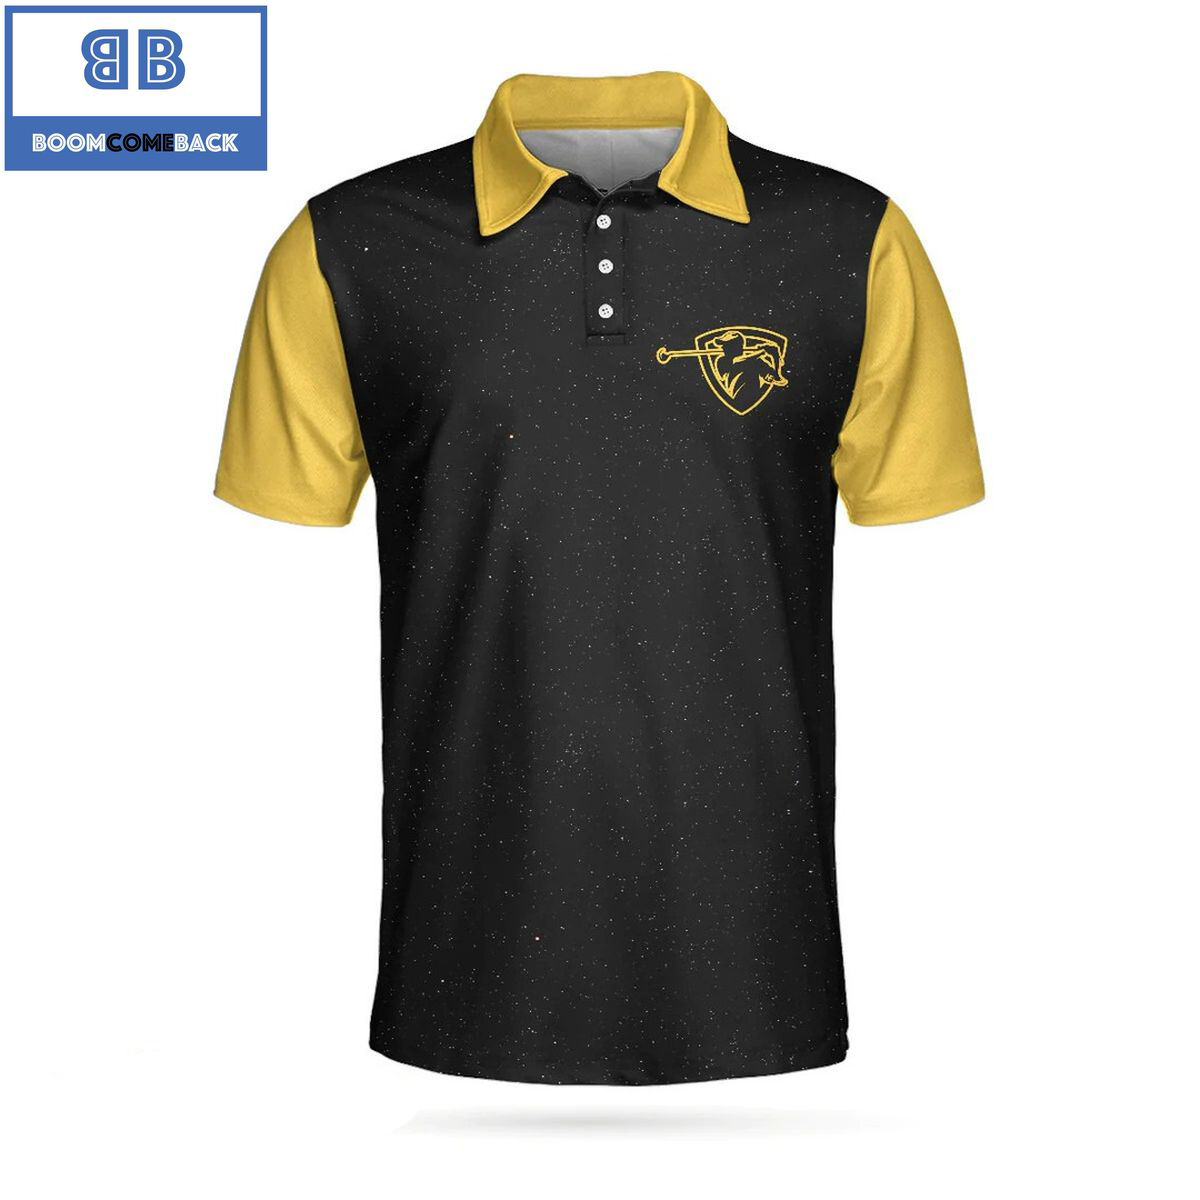 Golf2BMay2BThe2BCourse2BBe2BWith2BYou2BGalaxy2BAthletic2BCollared2BMens2BPolo2BShirt2B1 2pE8a